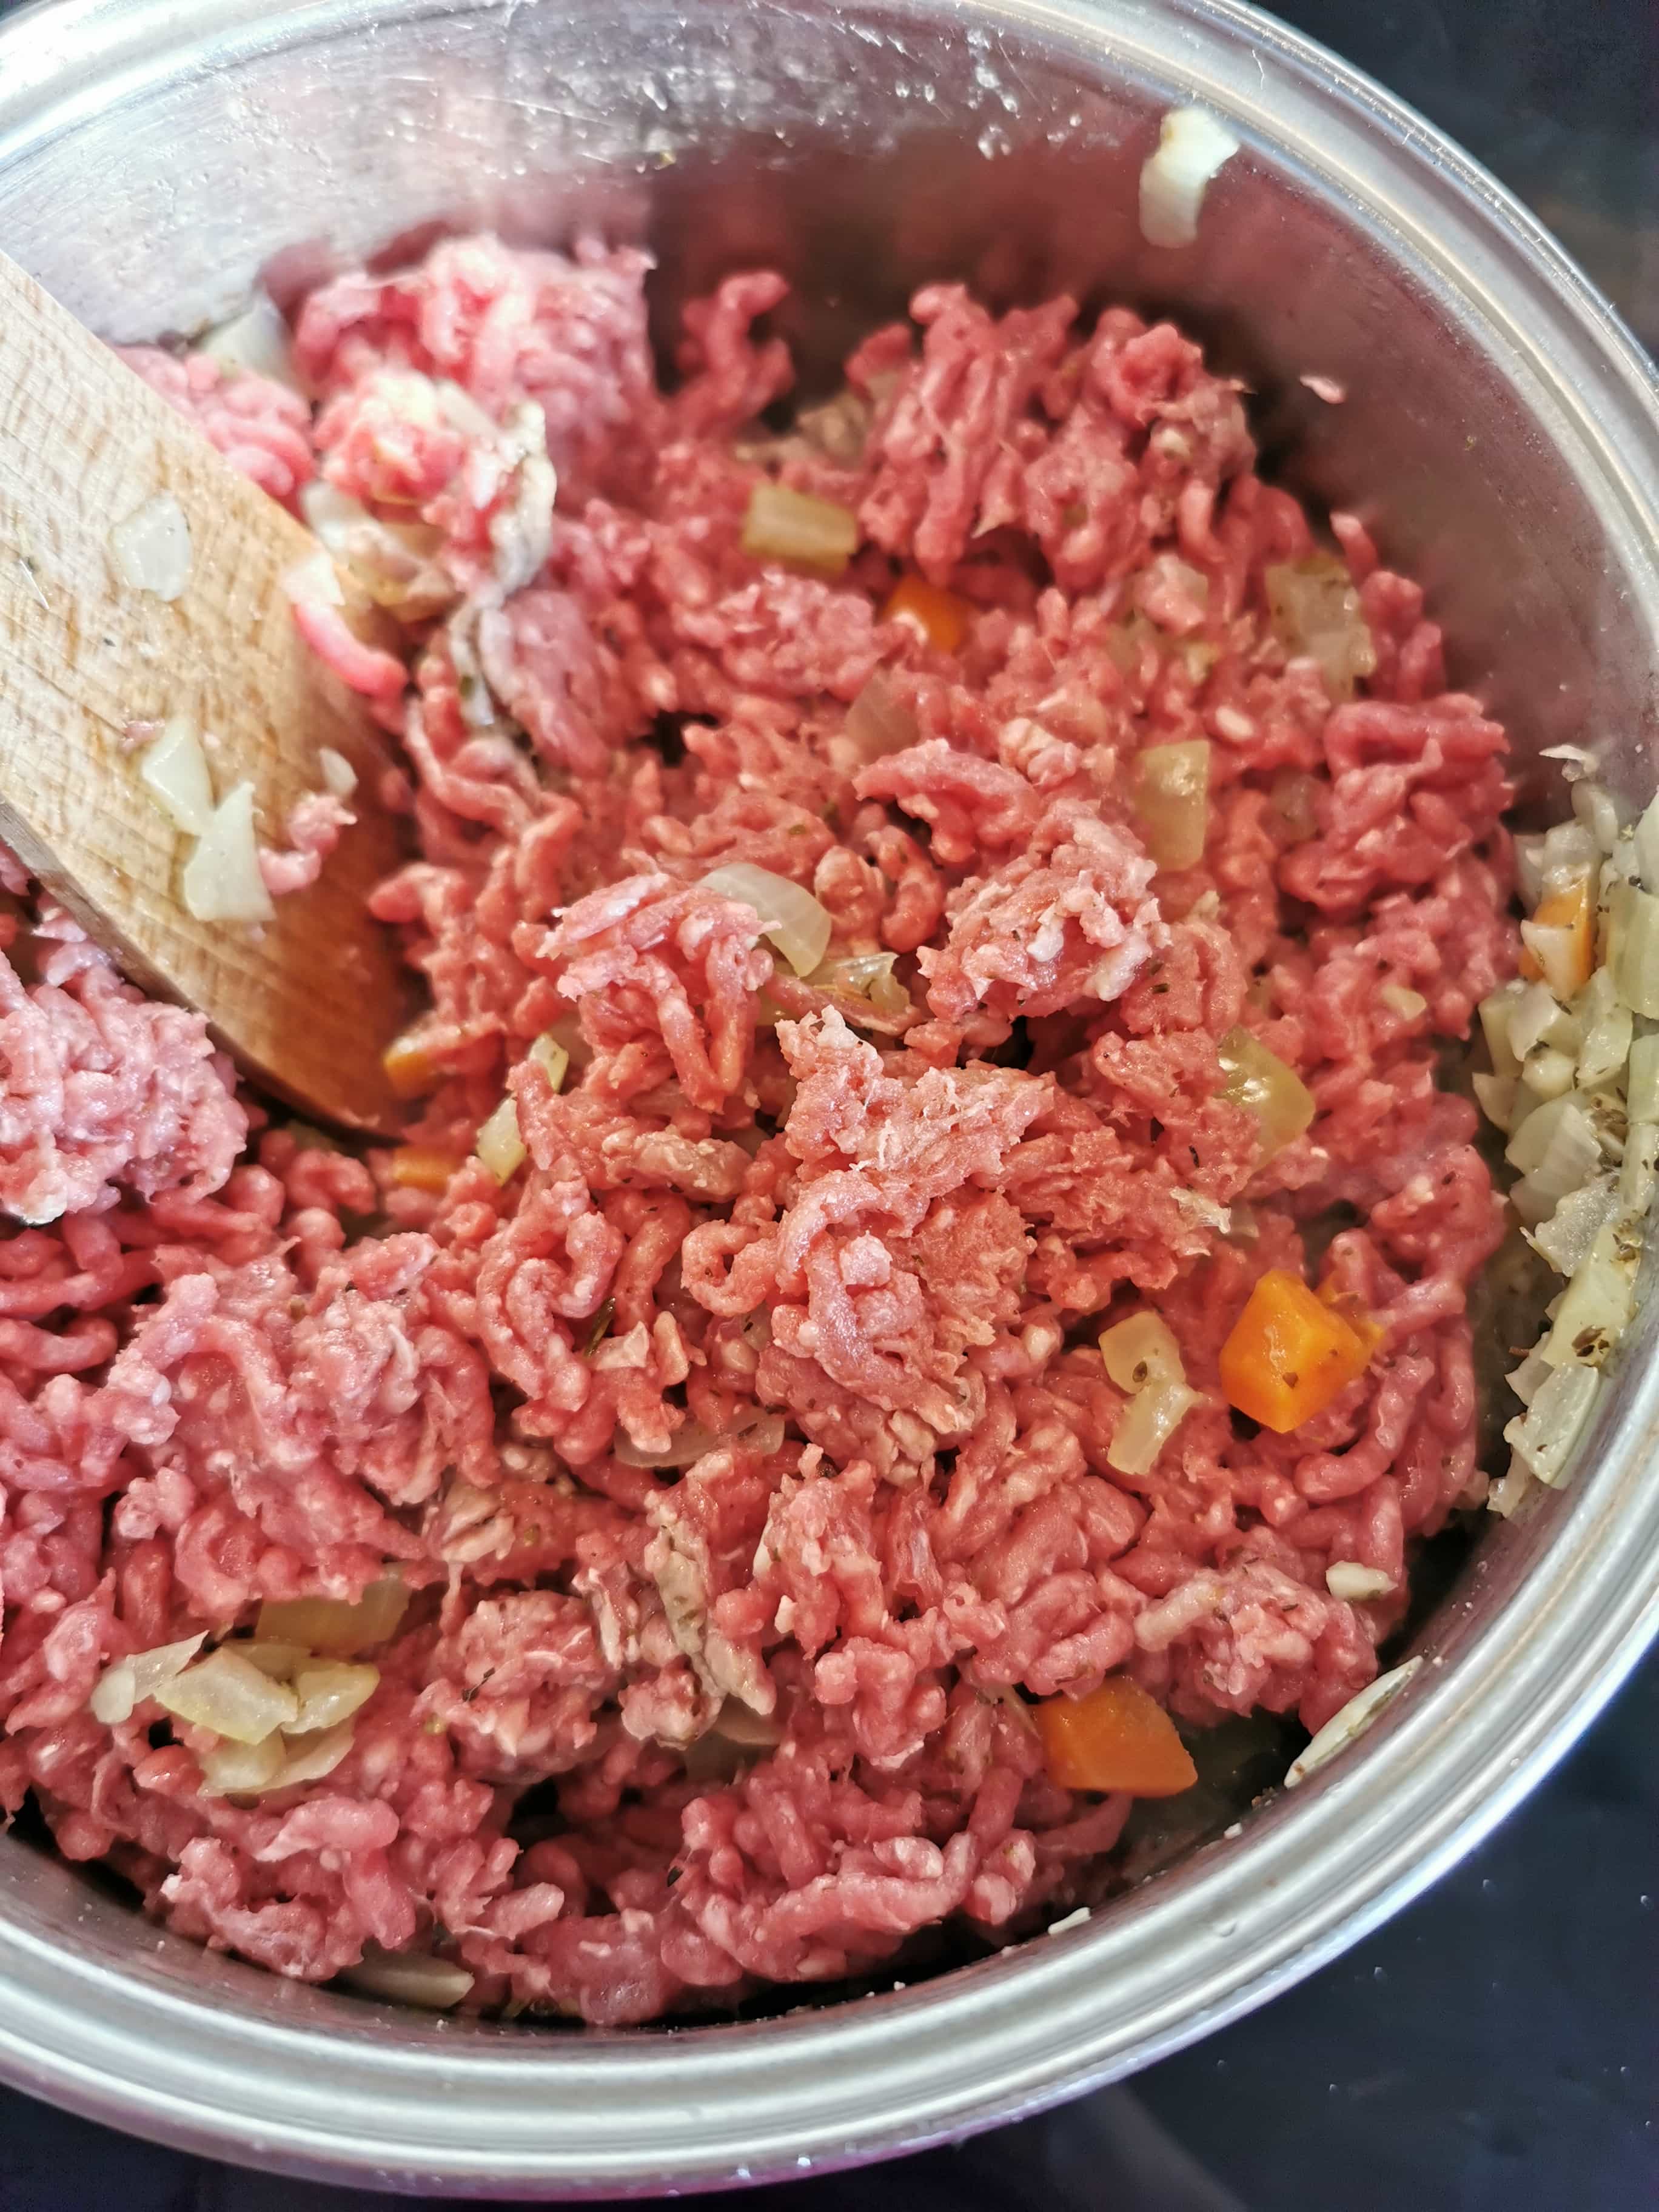 A pan of mince, onions, celery and carrots browning